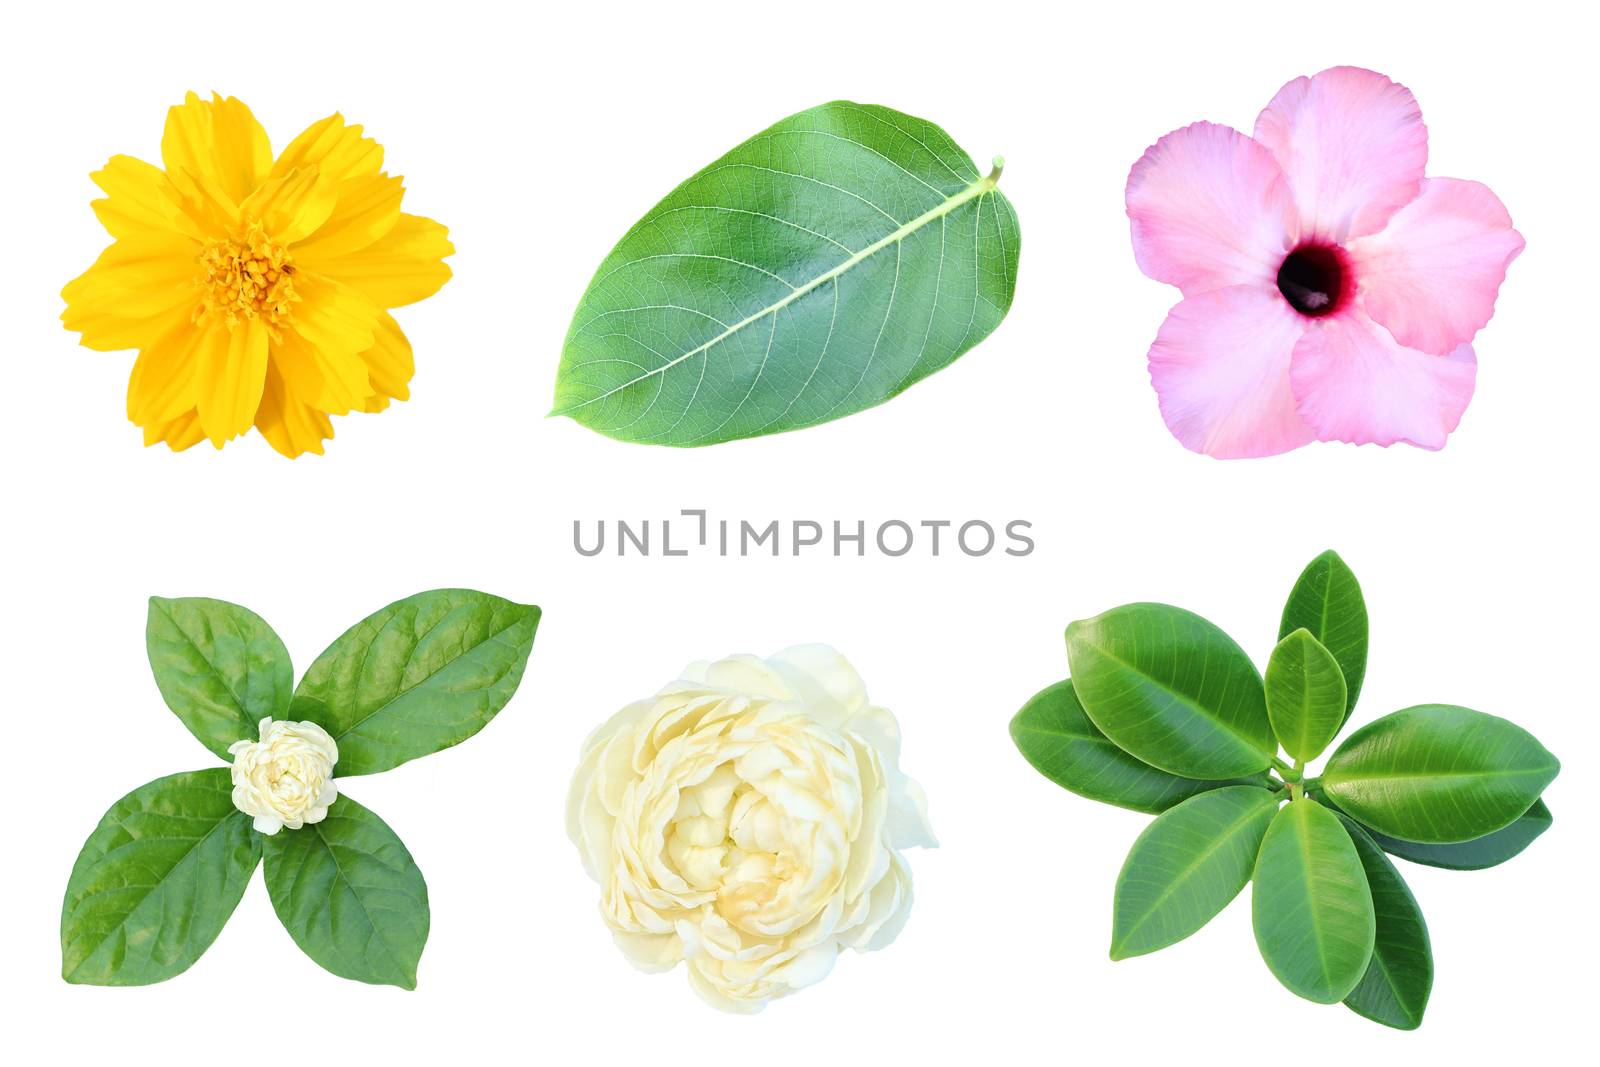 Images of flowers and leaves on a white background.